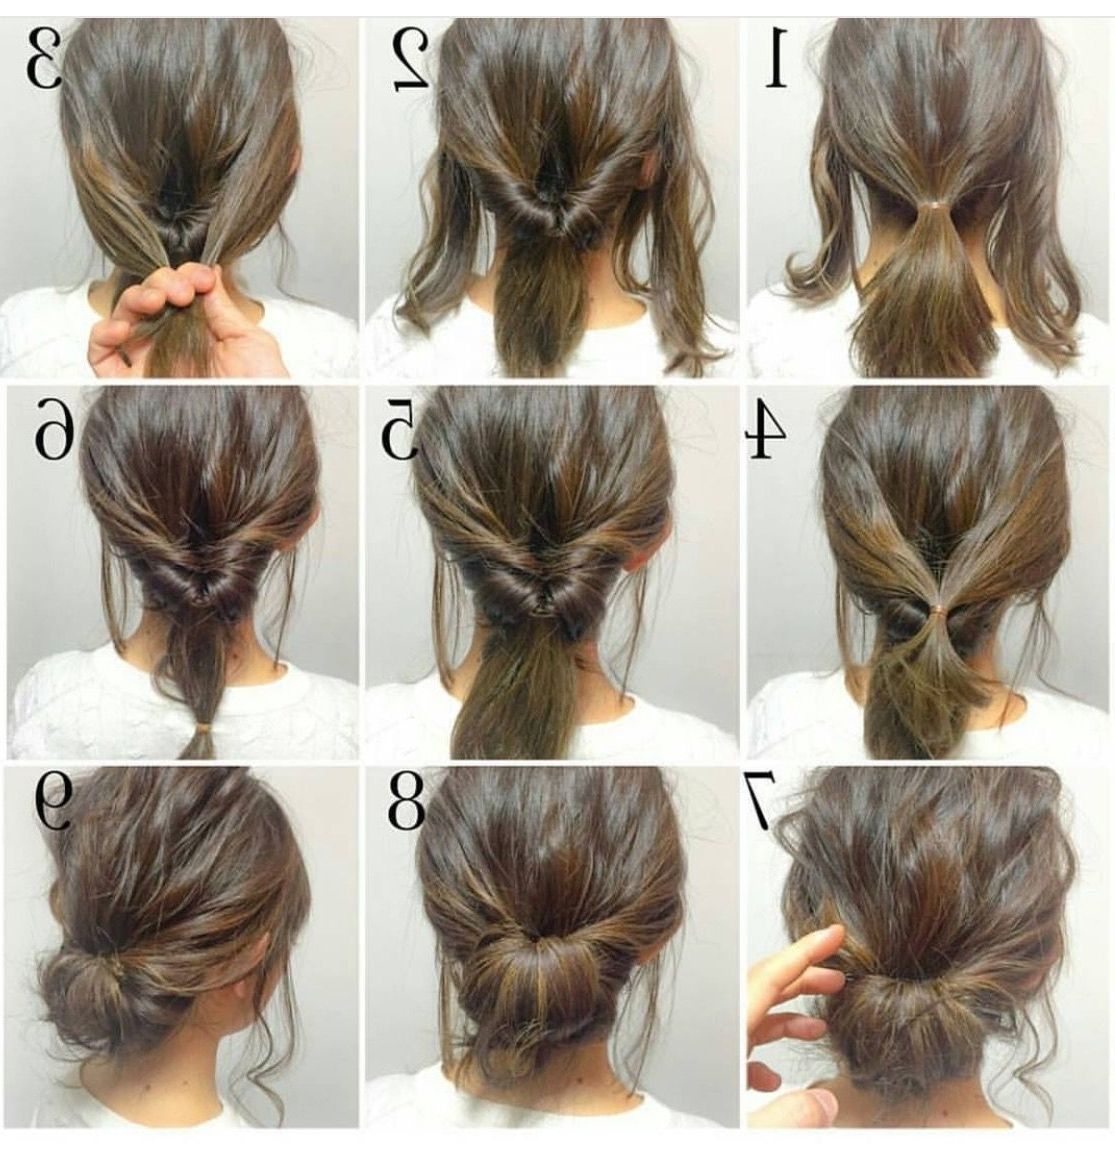 4 Messy Updos For Long Hair | Hairz | Pinterest | Updos, Hair Style With Easiest Updo Hairstyles (View 1 of 15)